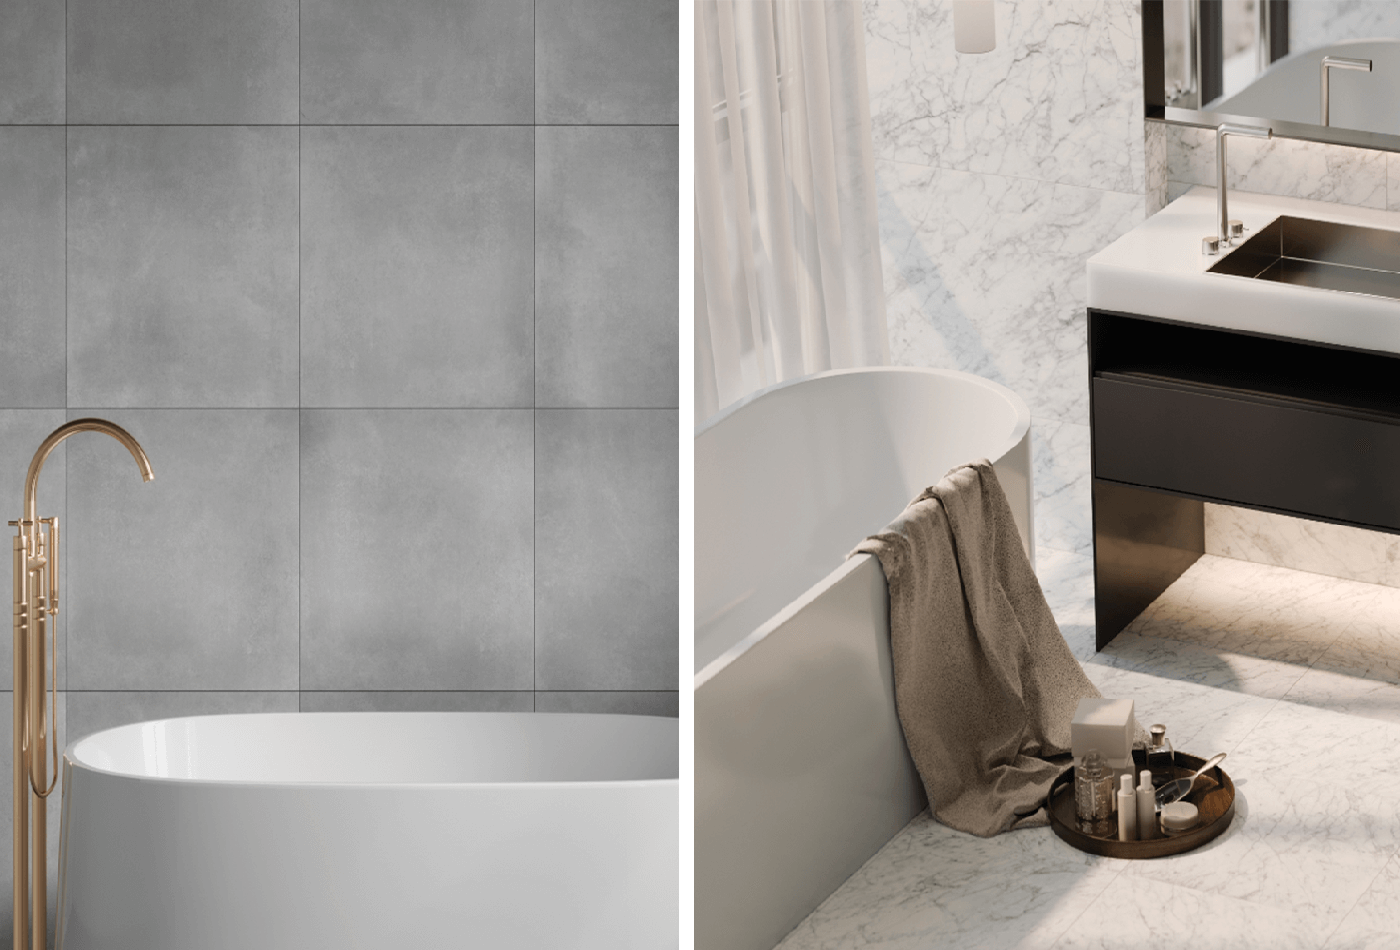 Patterned Porcelain Tiles and Bathrooms